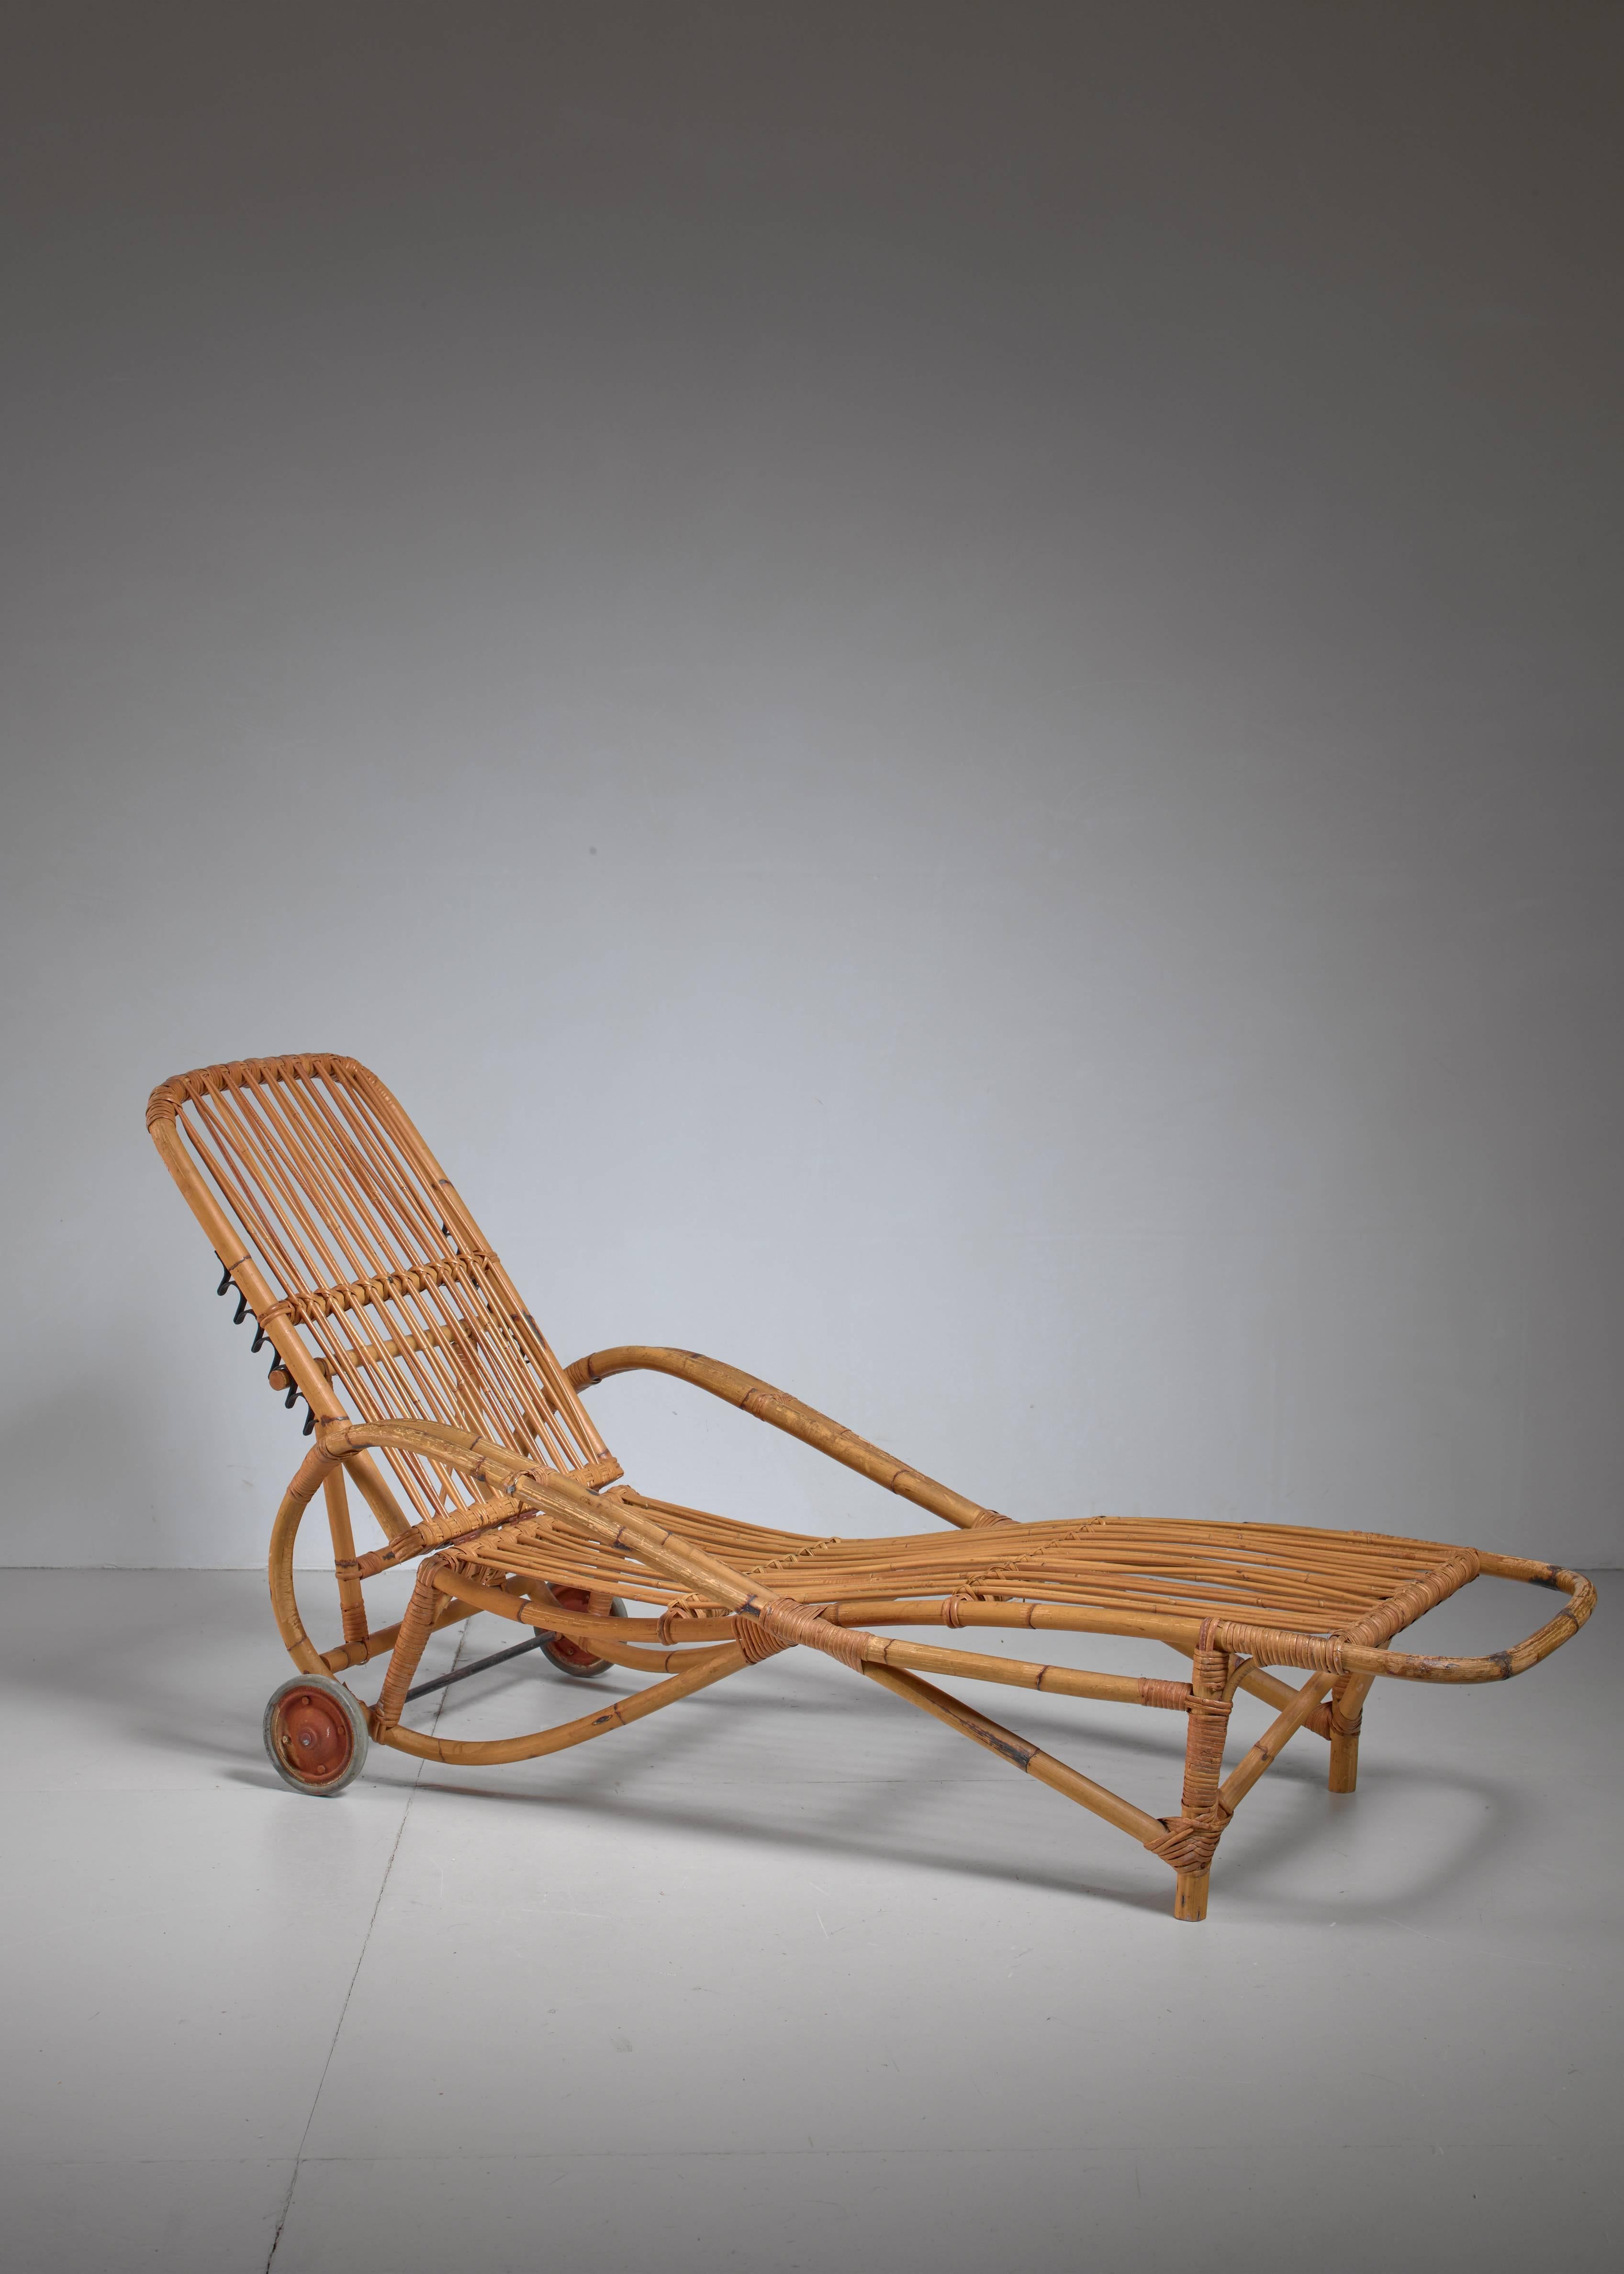 A garden chaise longue made of bamboo with two rubber wheels, strongly reminiscent of the garden chair by Josef Frank.

The backrest can be placed in six different positions. In the lowest position, measure: the chair is 62 cm (24.5 inch) high and